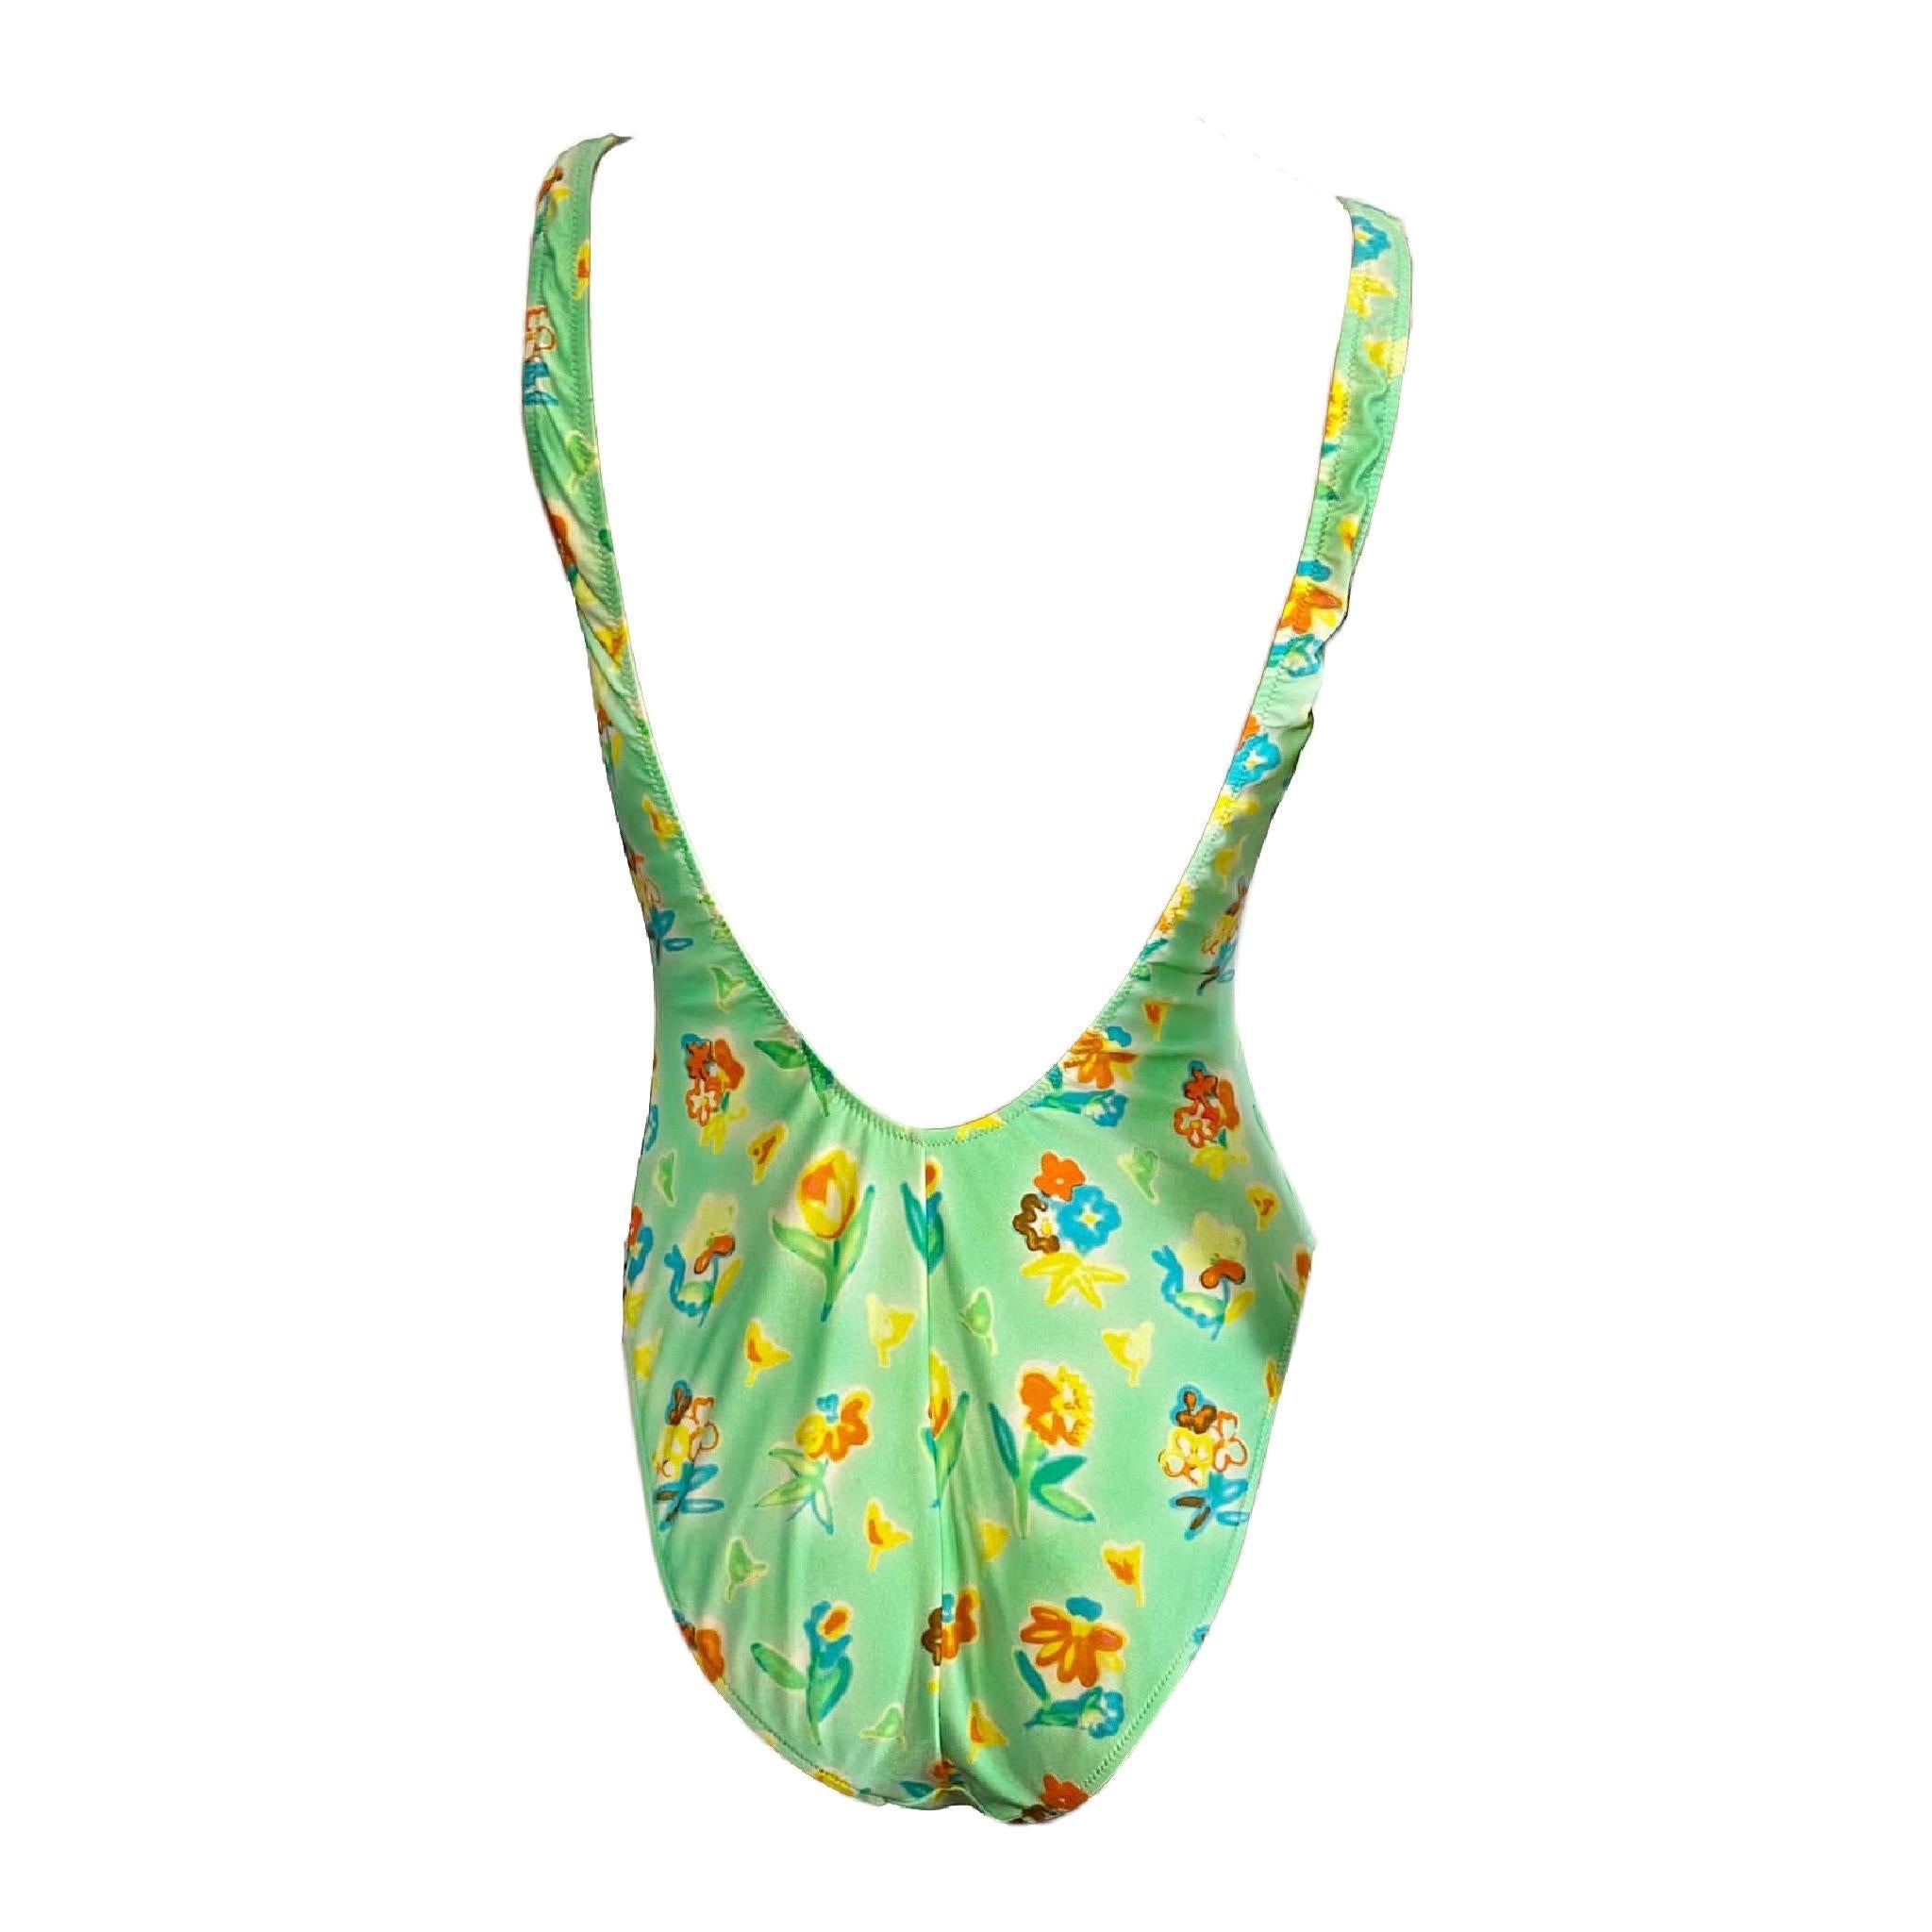 Gianni Versace low back one-piece swimsuit, green with neon graffiti floral pattern from m Spring/Summer 1996 (same print seen on Carolyn Murphy, Look 78).

Size label 44

Bust: 40 cm / 15.7 inch
Total length (starting from strap): 66cm / 25.9